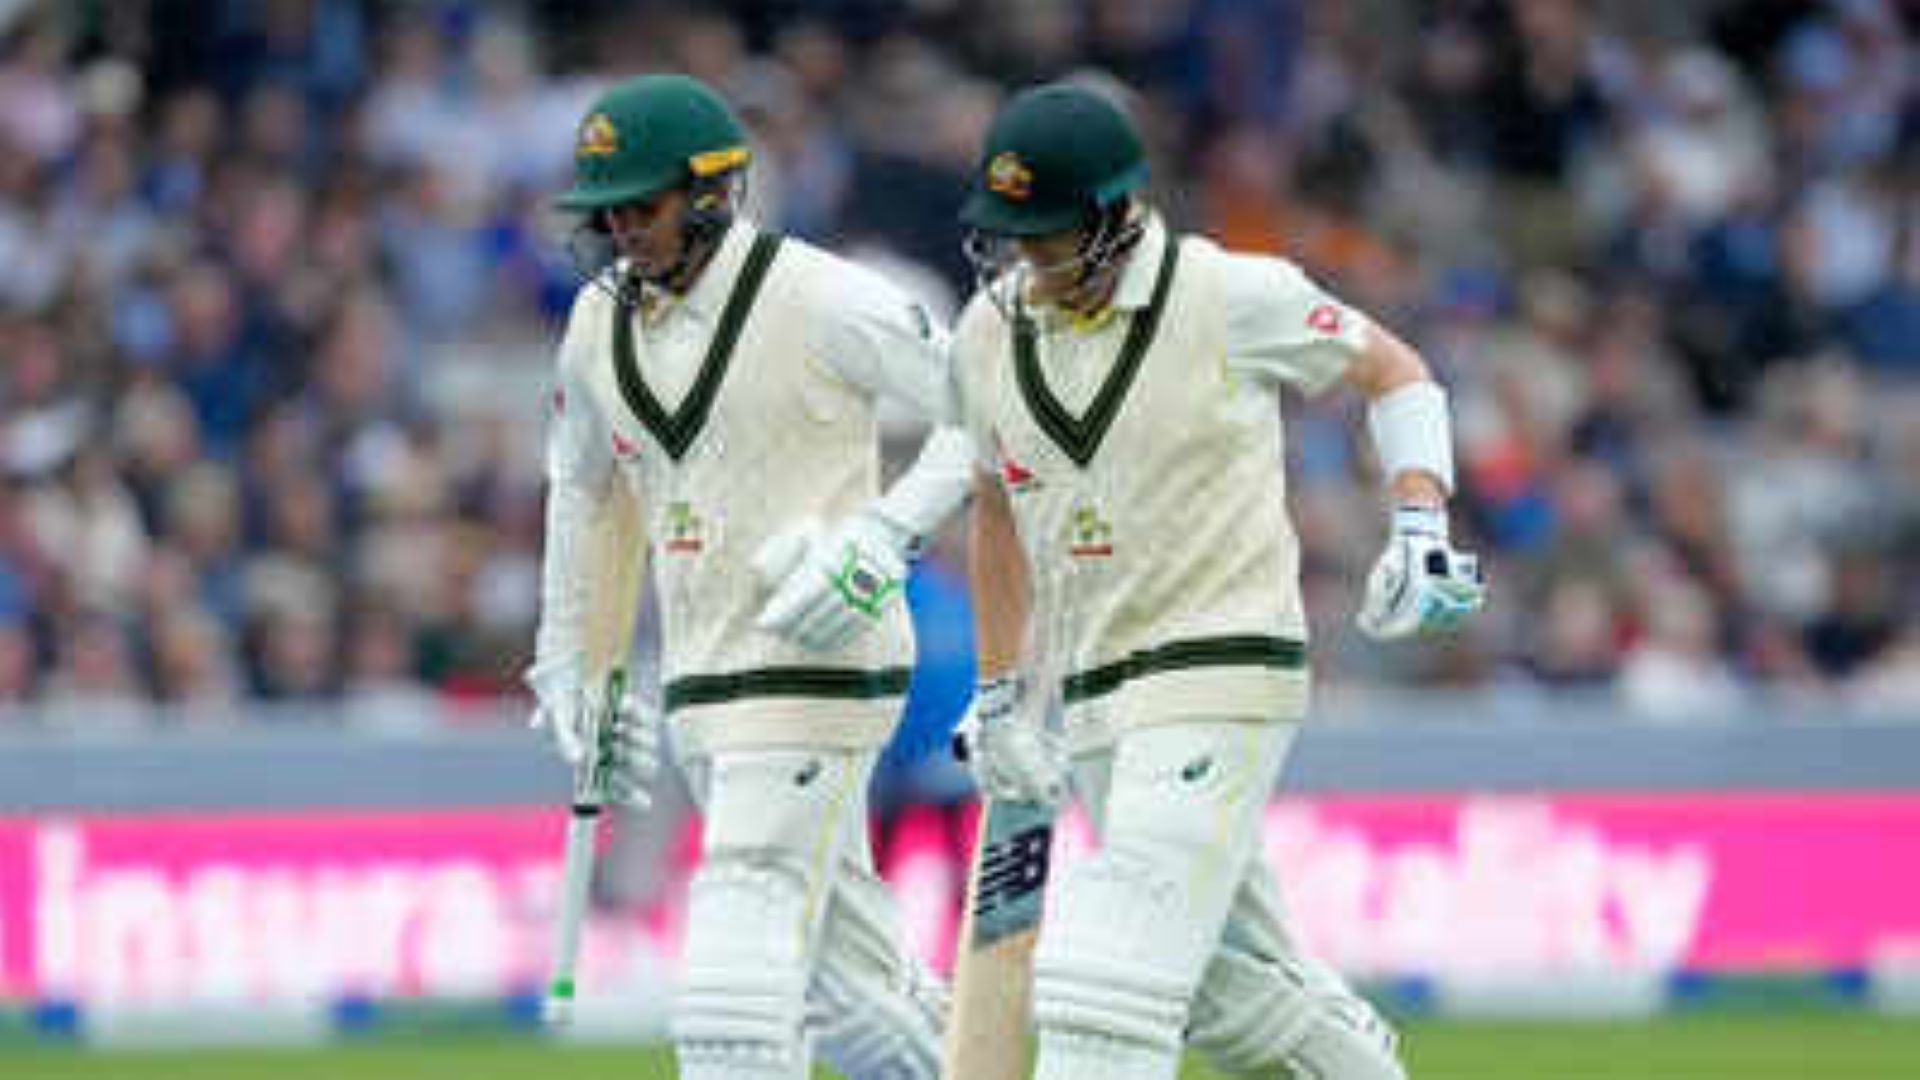 Khawaja and Smith will look to dent England&#039;s hopes further on Day 4 of the Second Test.